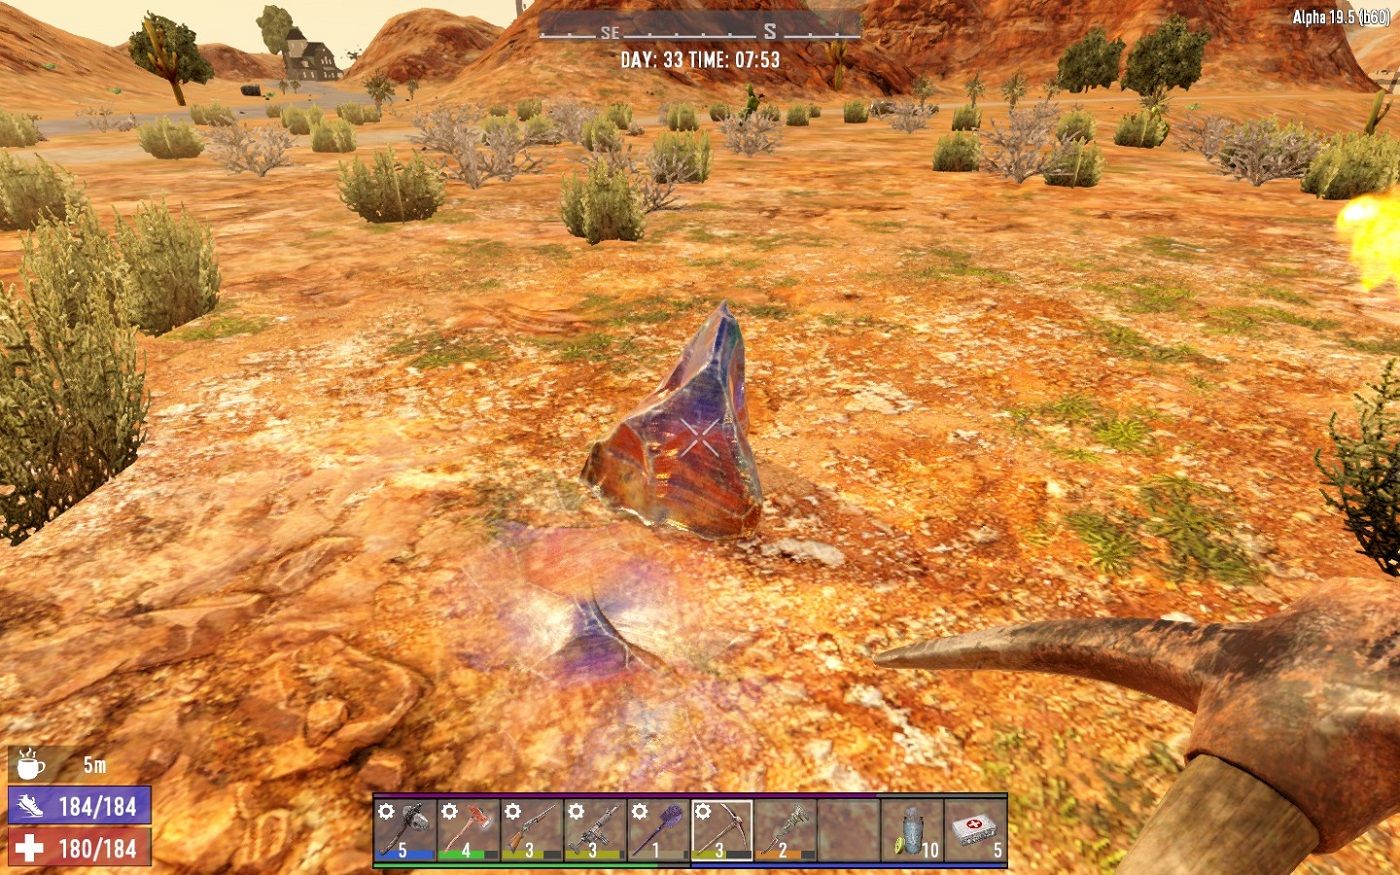 Screenshot from 7 Days to Die showing a shard of shale sticking out from the dessert floor.